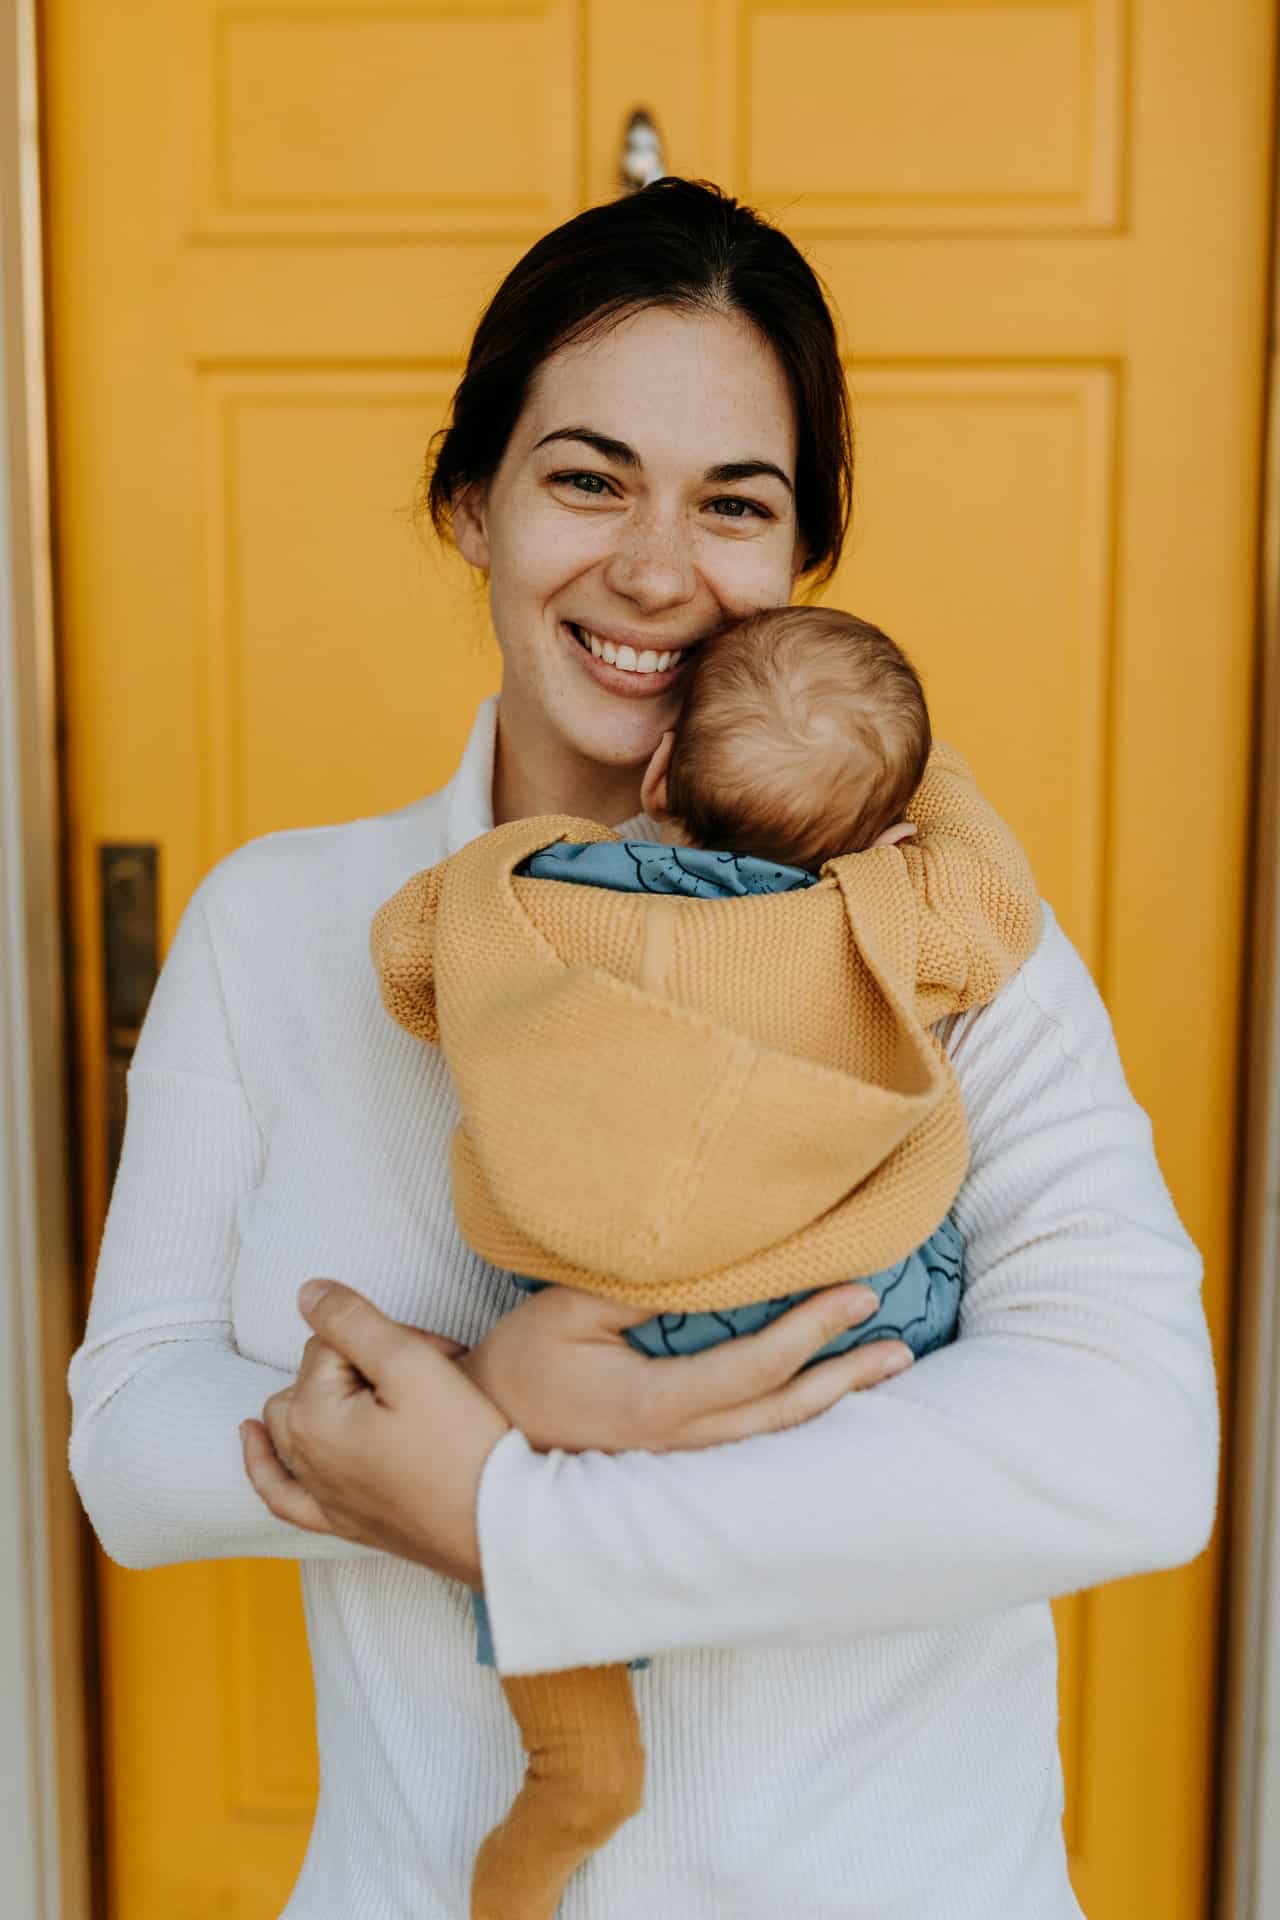 Woman holding newborn in front of a bright yellow door.